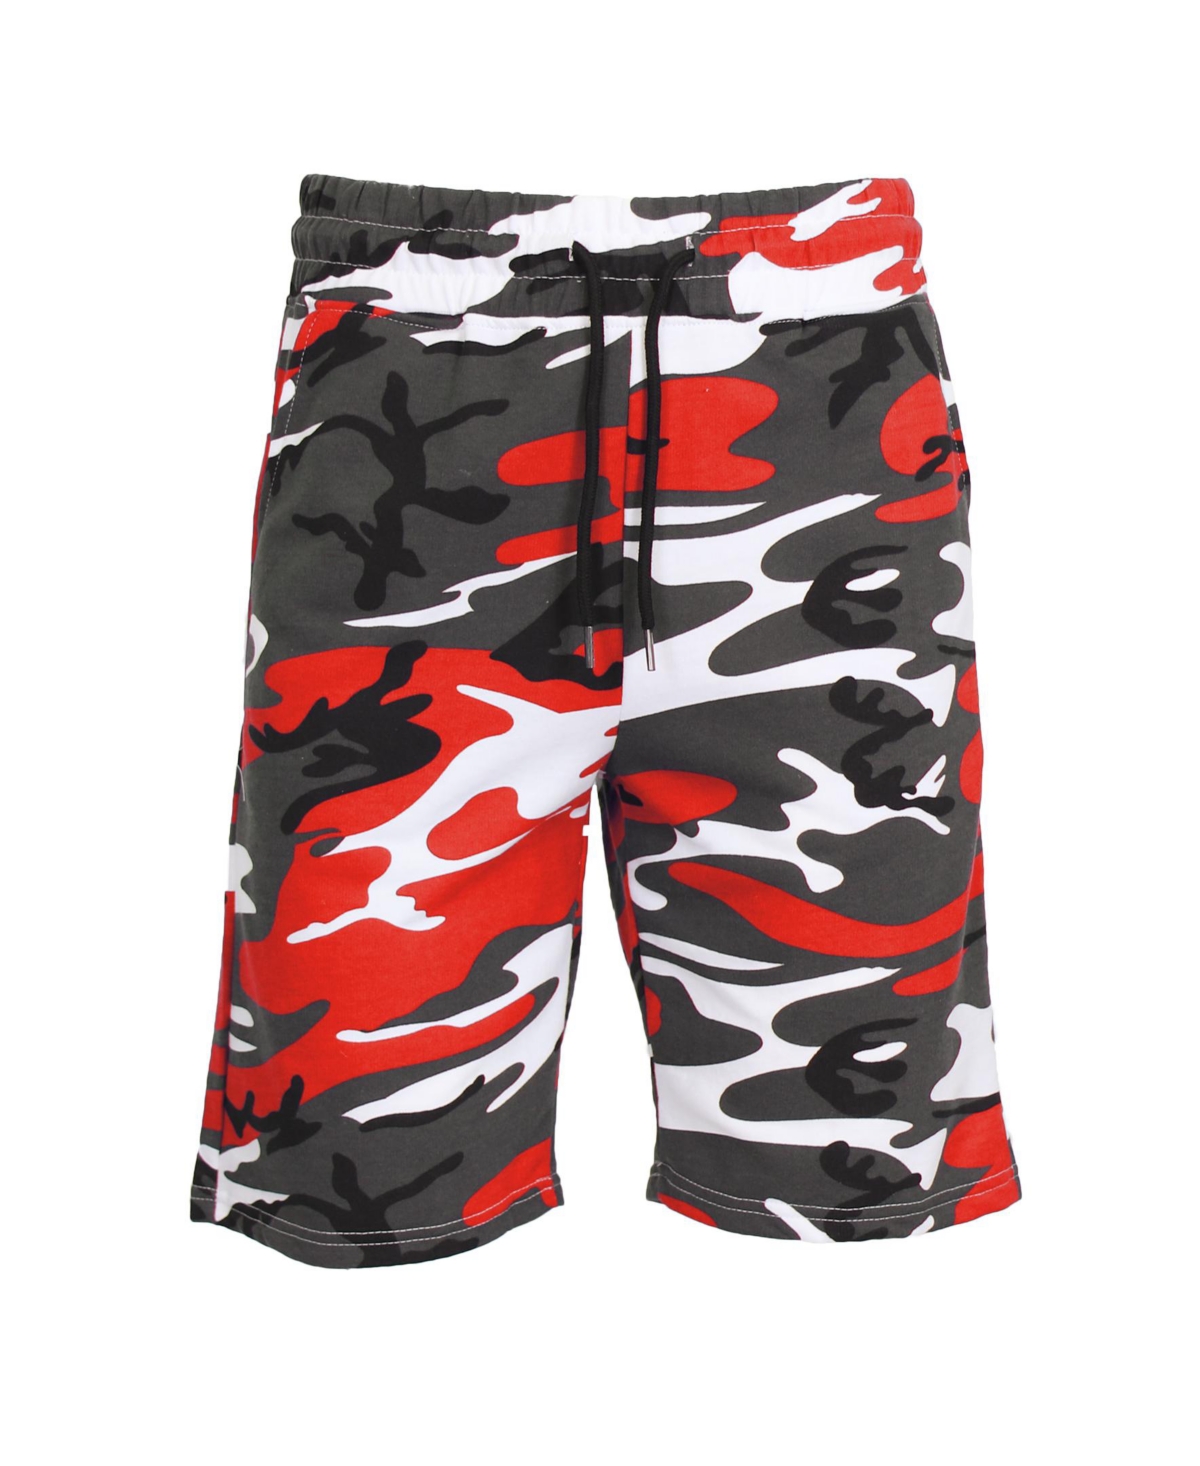 Men's Camo Printed French Terry Shorts - Mint Camo